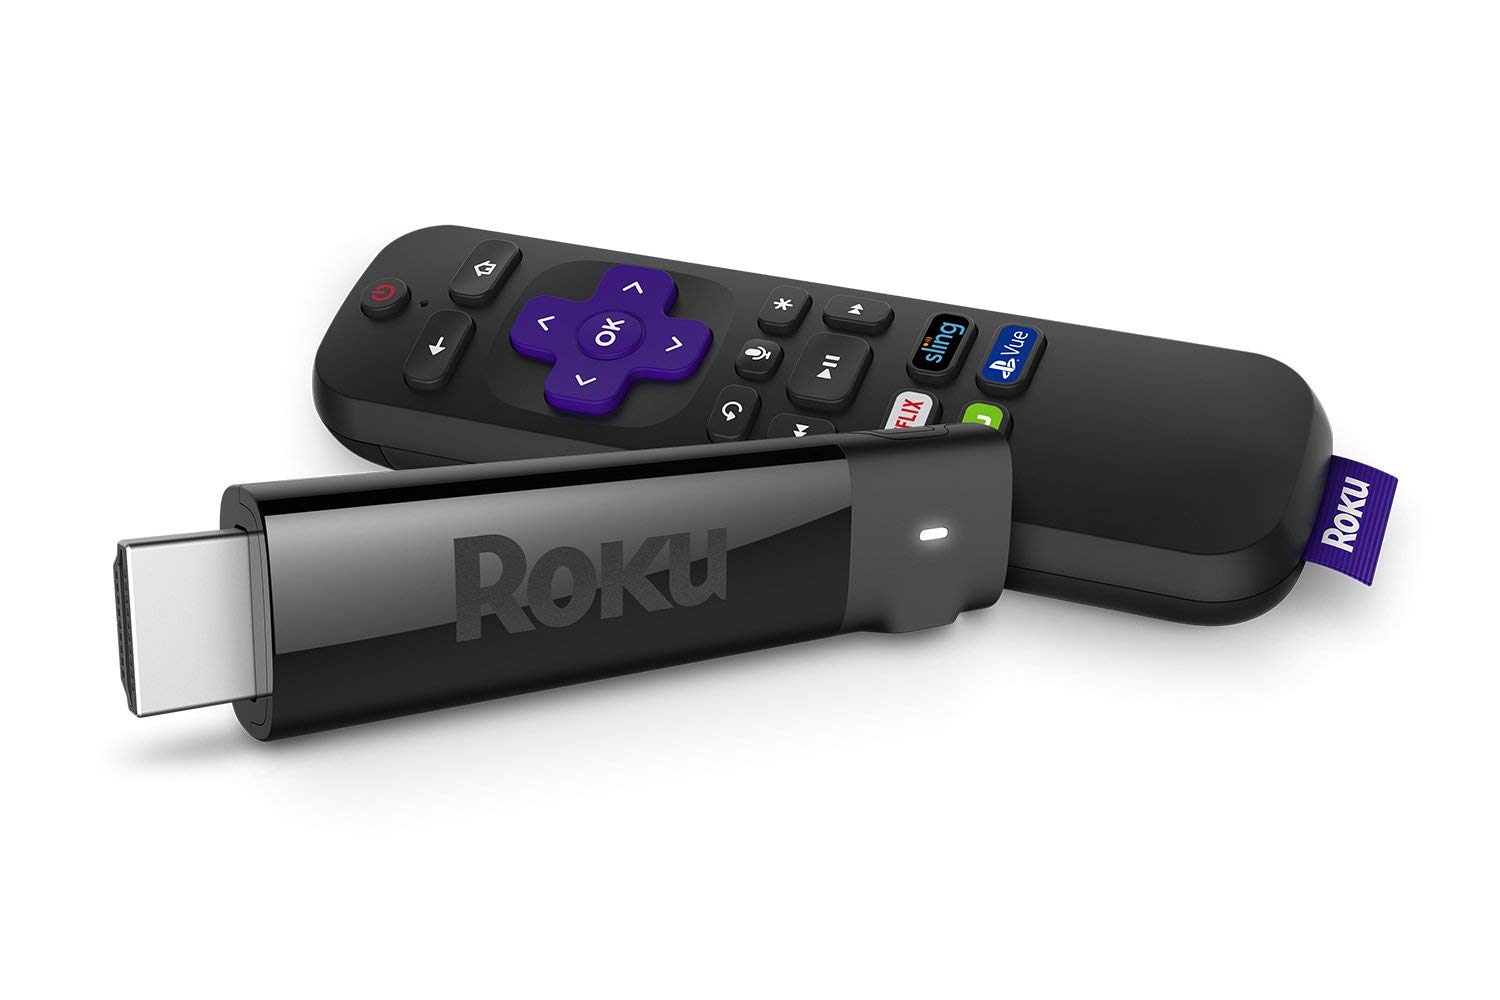 Amazon & Roku Control Almost 70% of The US Streaming Player Market